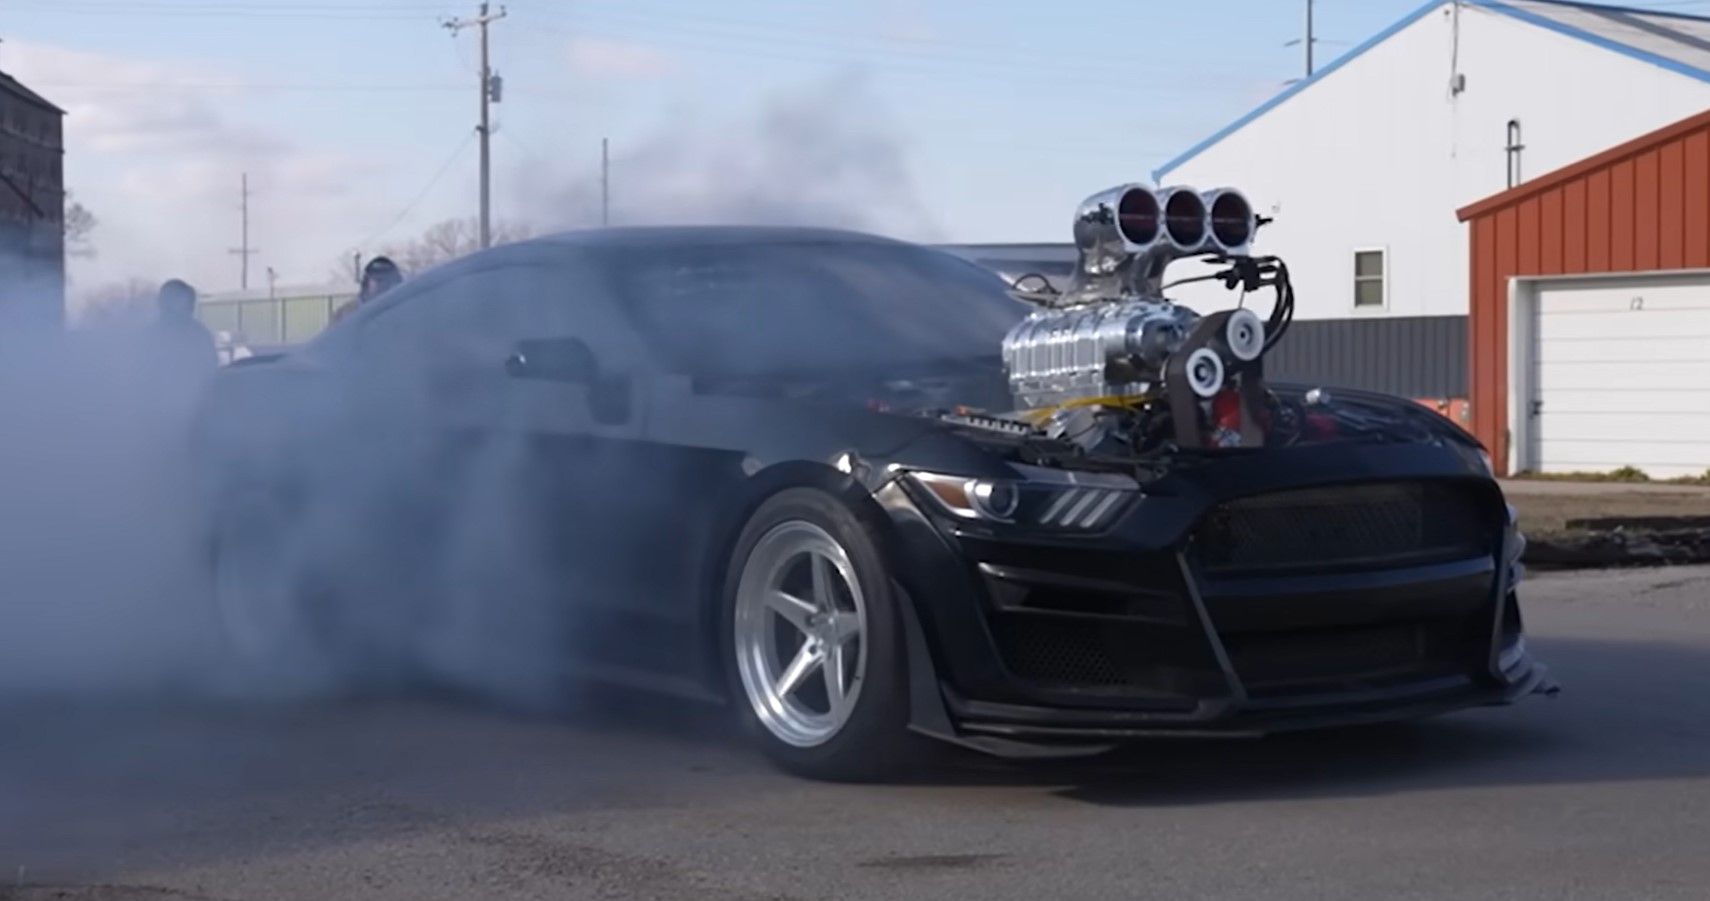 Westen Champlin's 2000-HP Ford Mustang doing burnouts front third quarter view